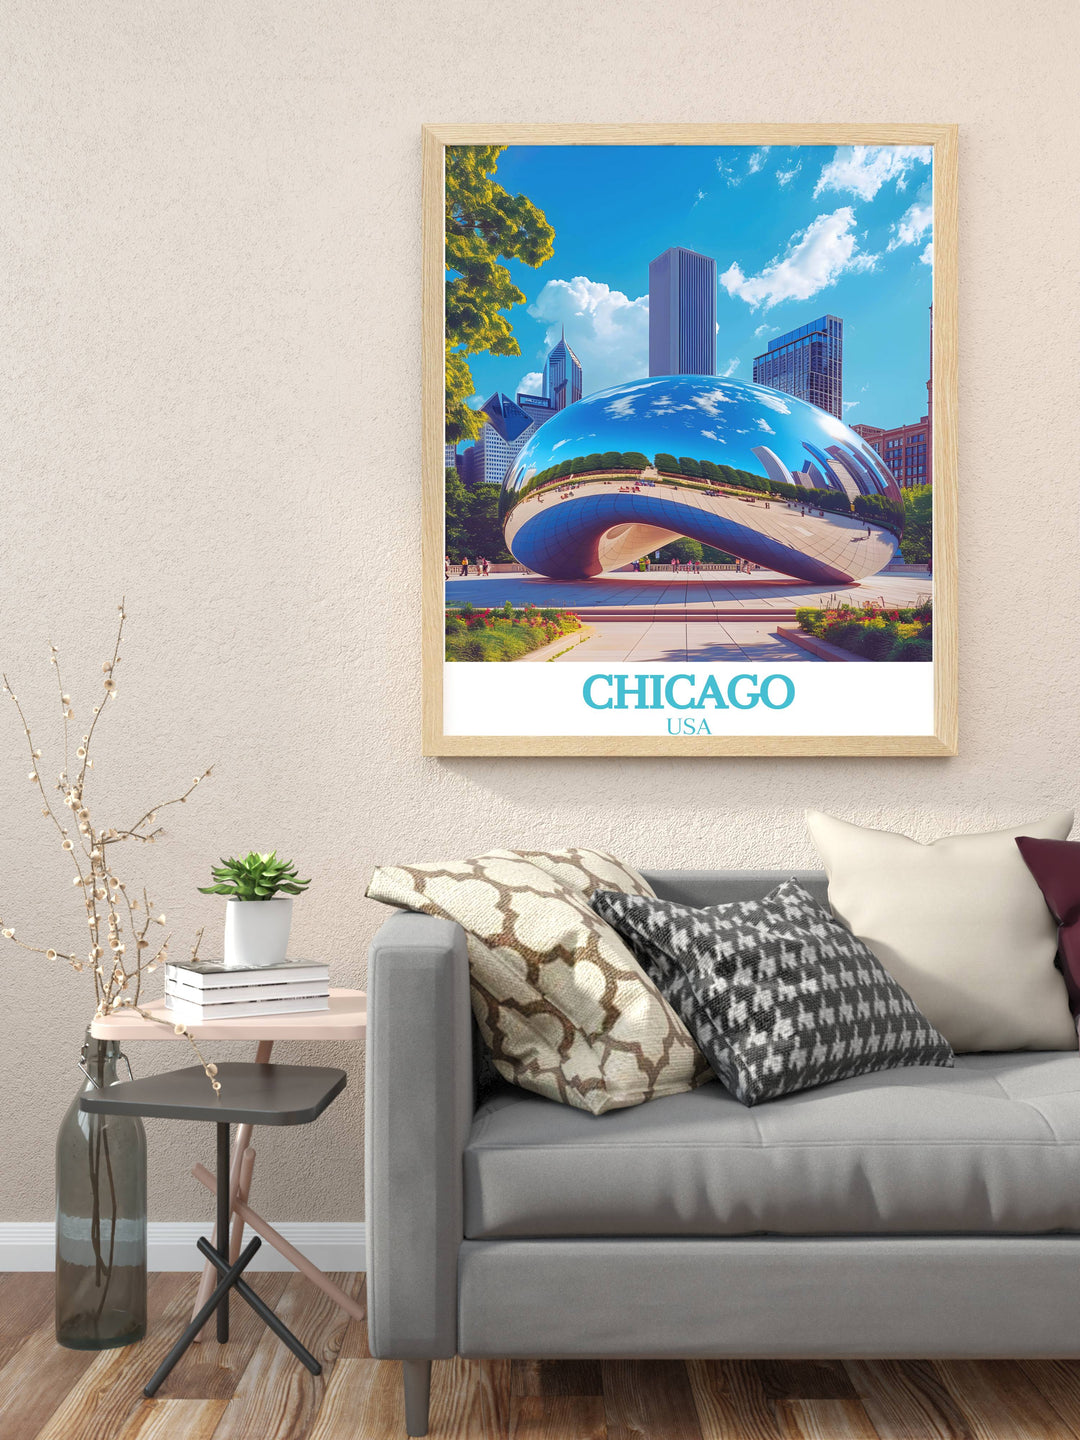 The Bean Cloud Gate poster capturing the dynamic angles and reflective surface of Chicagos iconic sculpture. An excellent piece for enhancing home decor or as a unique travel gift for loved ones.